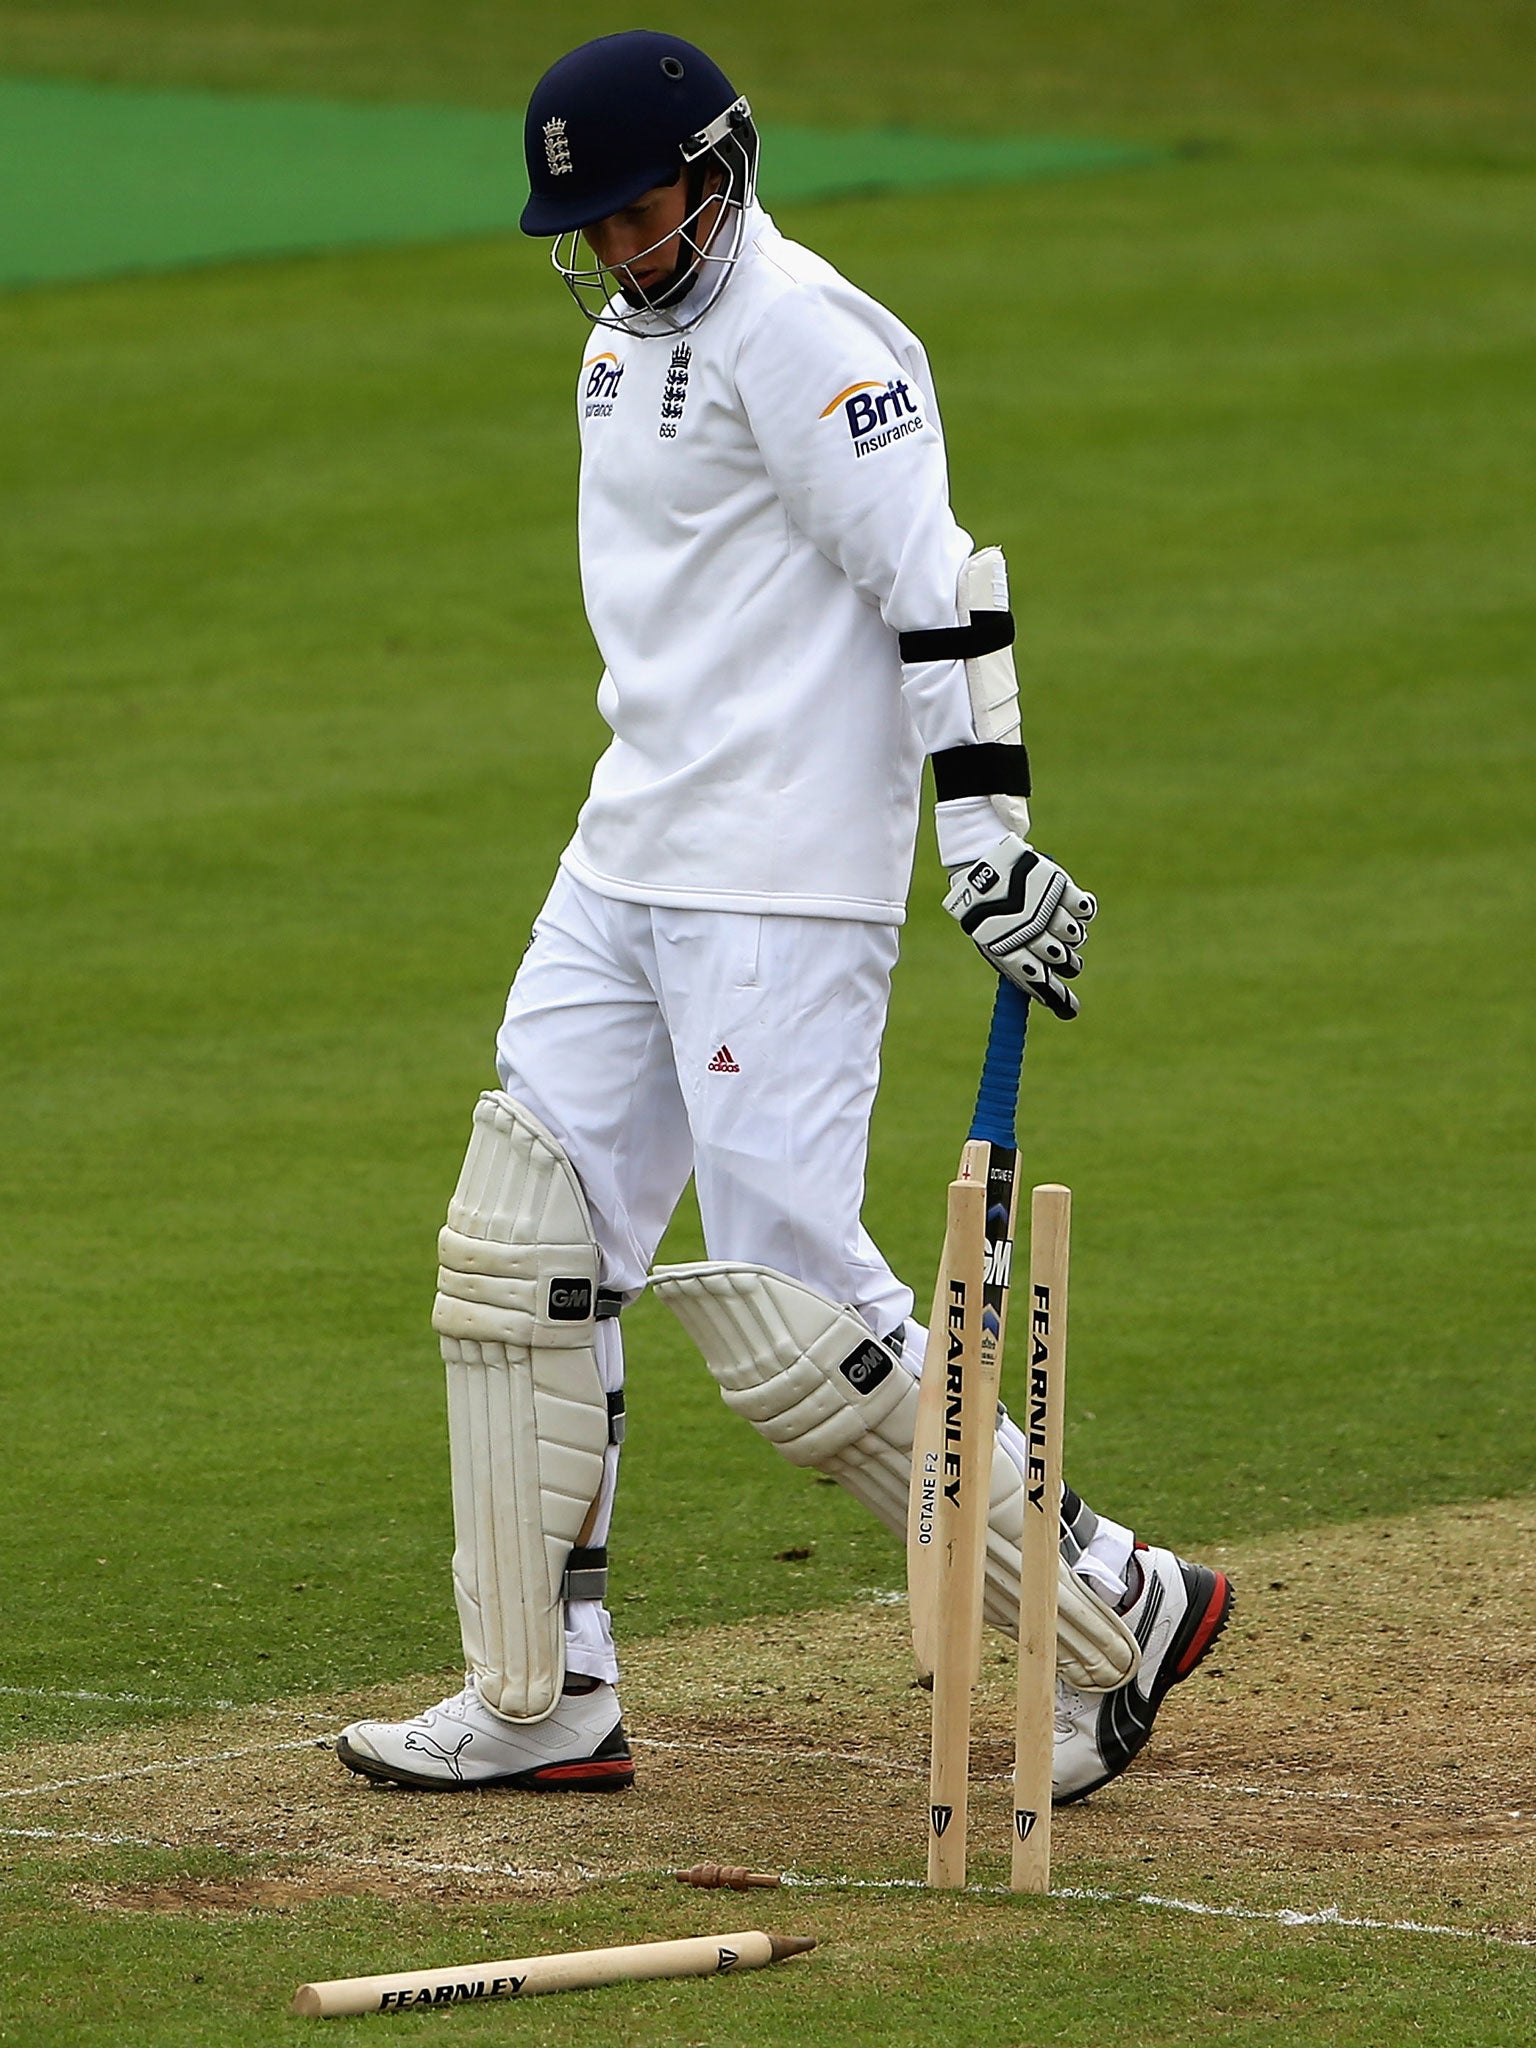 England Lions’ Joe Root is bowled after making 179